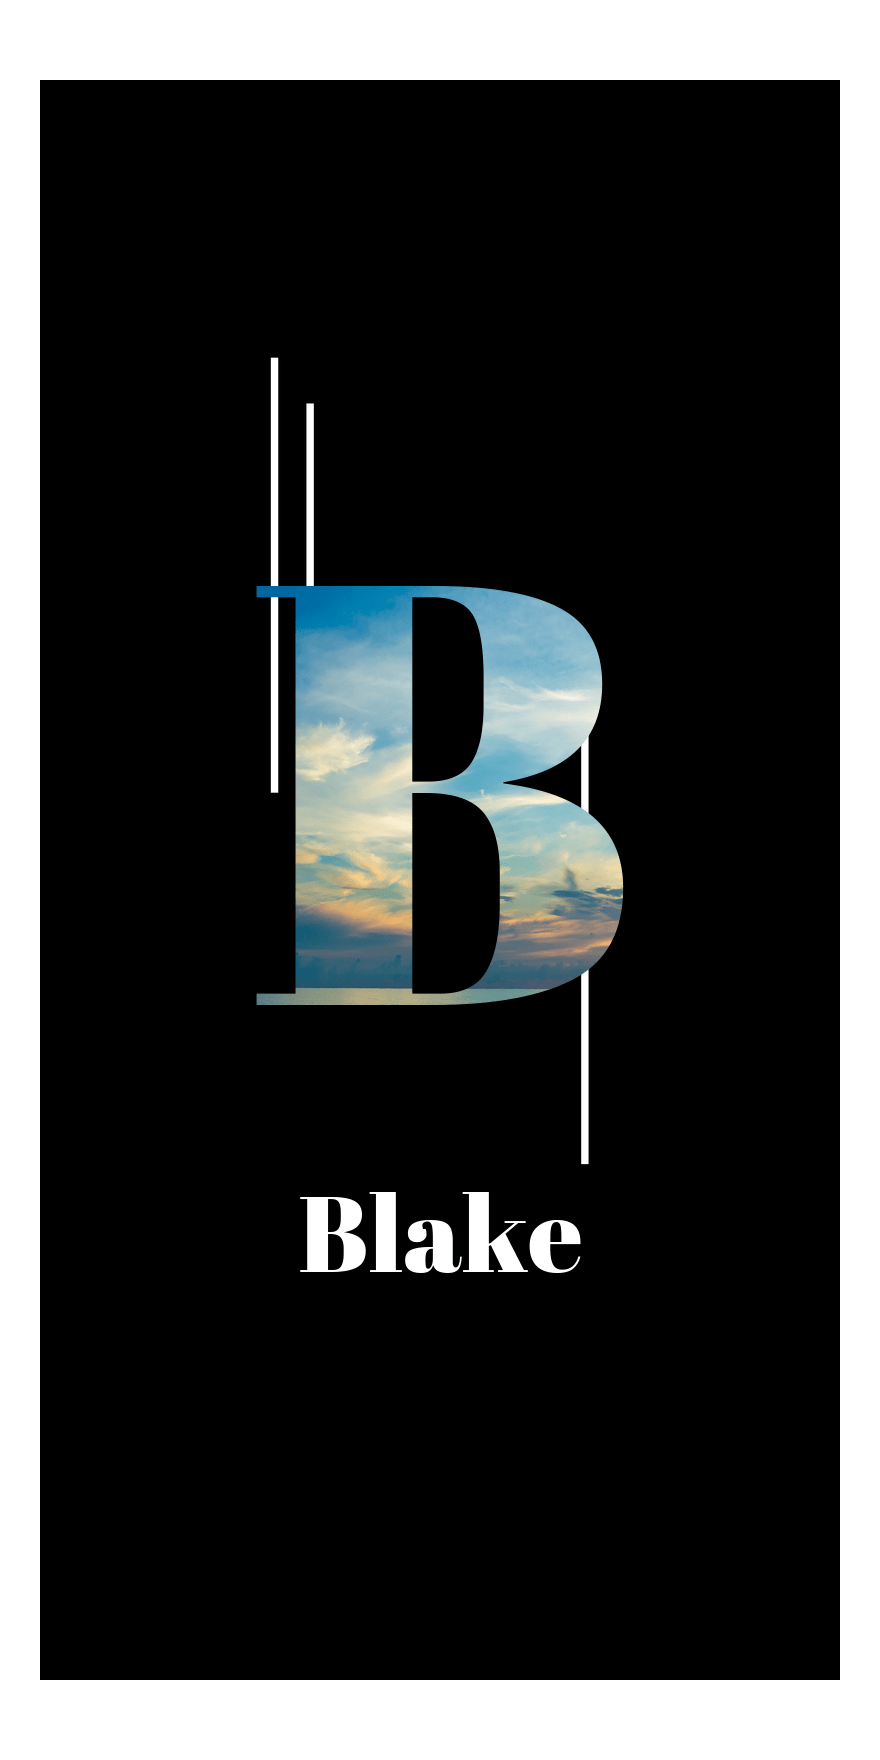 Personalized Ocean Beach Towel - Black - Front View